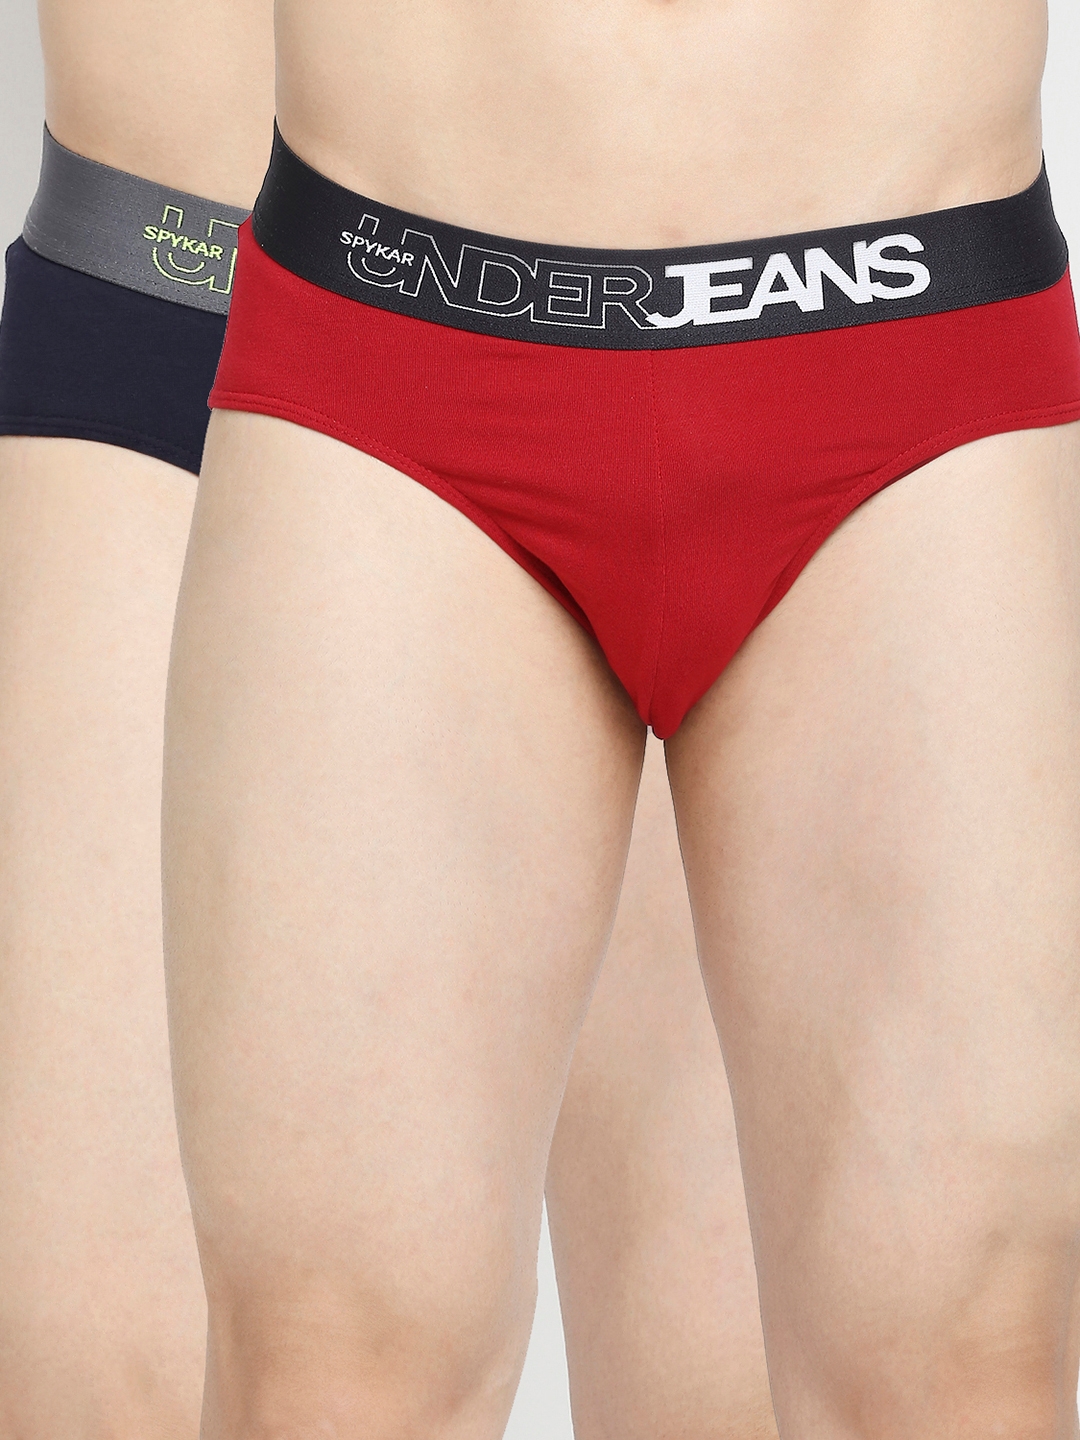 Underjeans by Spykar Maroon & Navy Blue Cotton Blend Brief -Pack Of 2